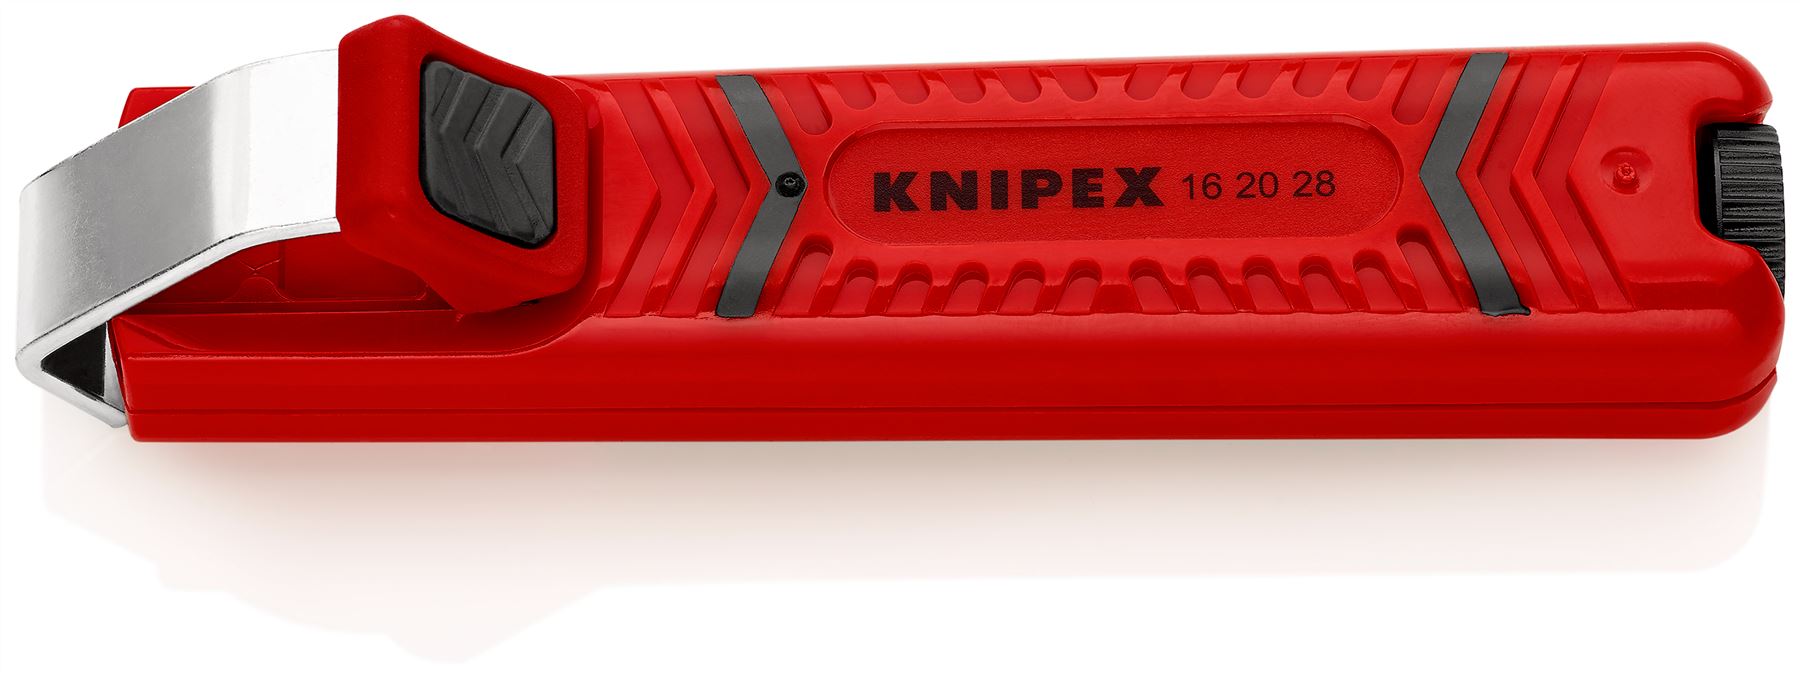 KNIPEX Round Cable Stripping Tool with Scalpel Blade 130mm for 8-28mm Diameter 16 20 28 SB